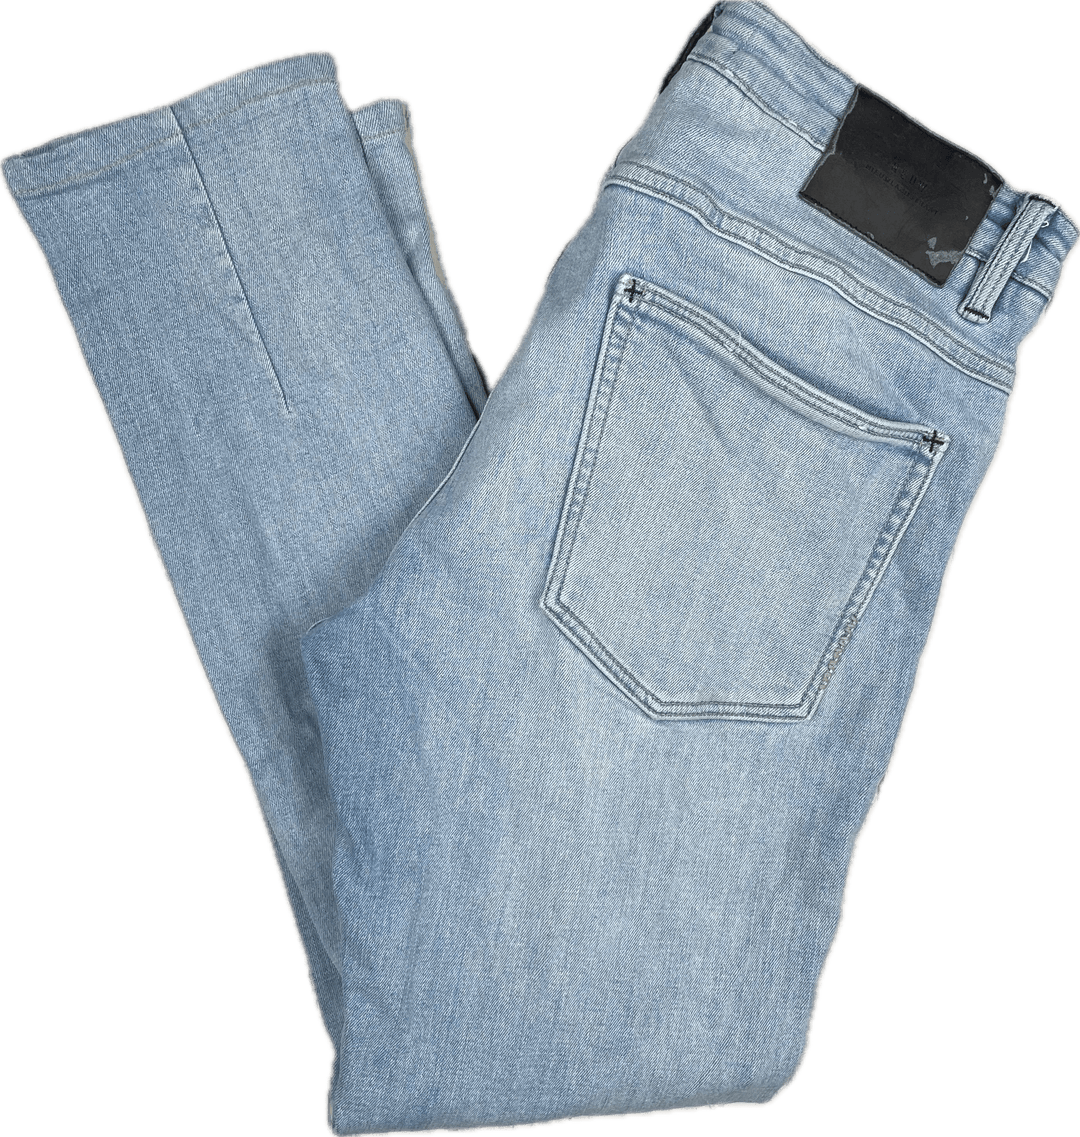 Mens NEUW 'Rebel Skinny' Busted Knee Stretch Jeans - Size 32 - Jean Pool